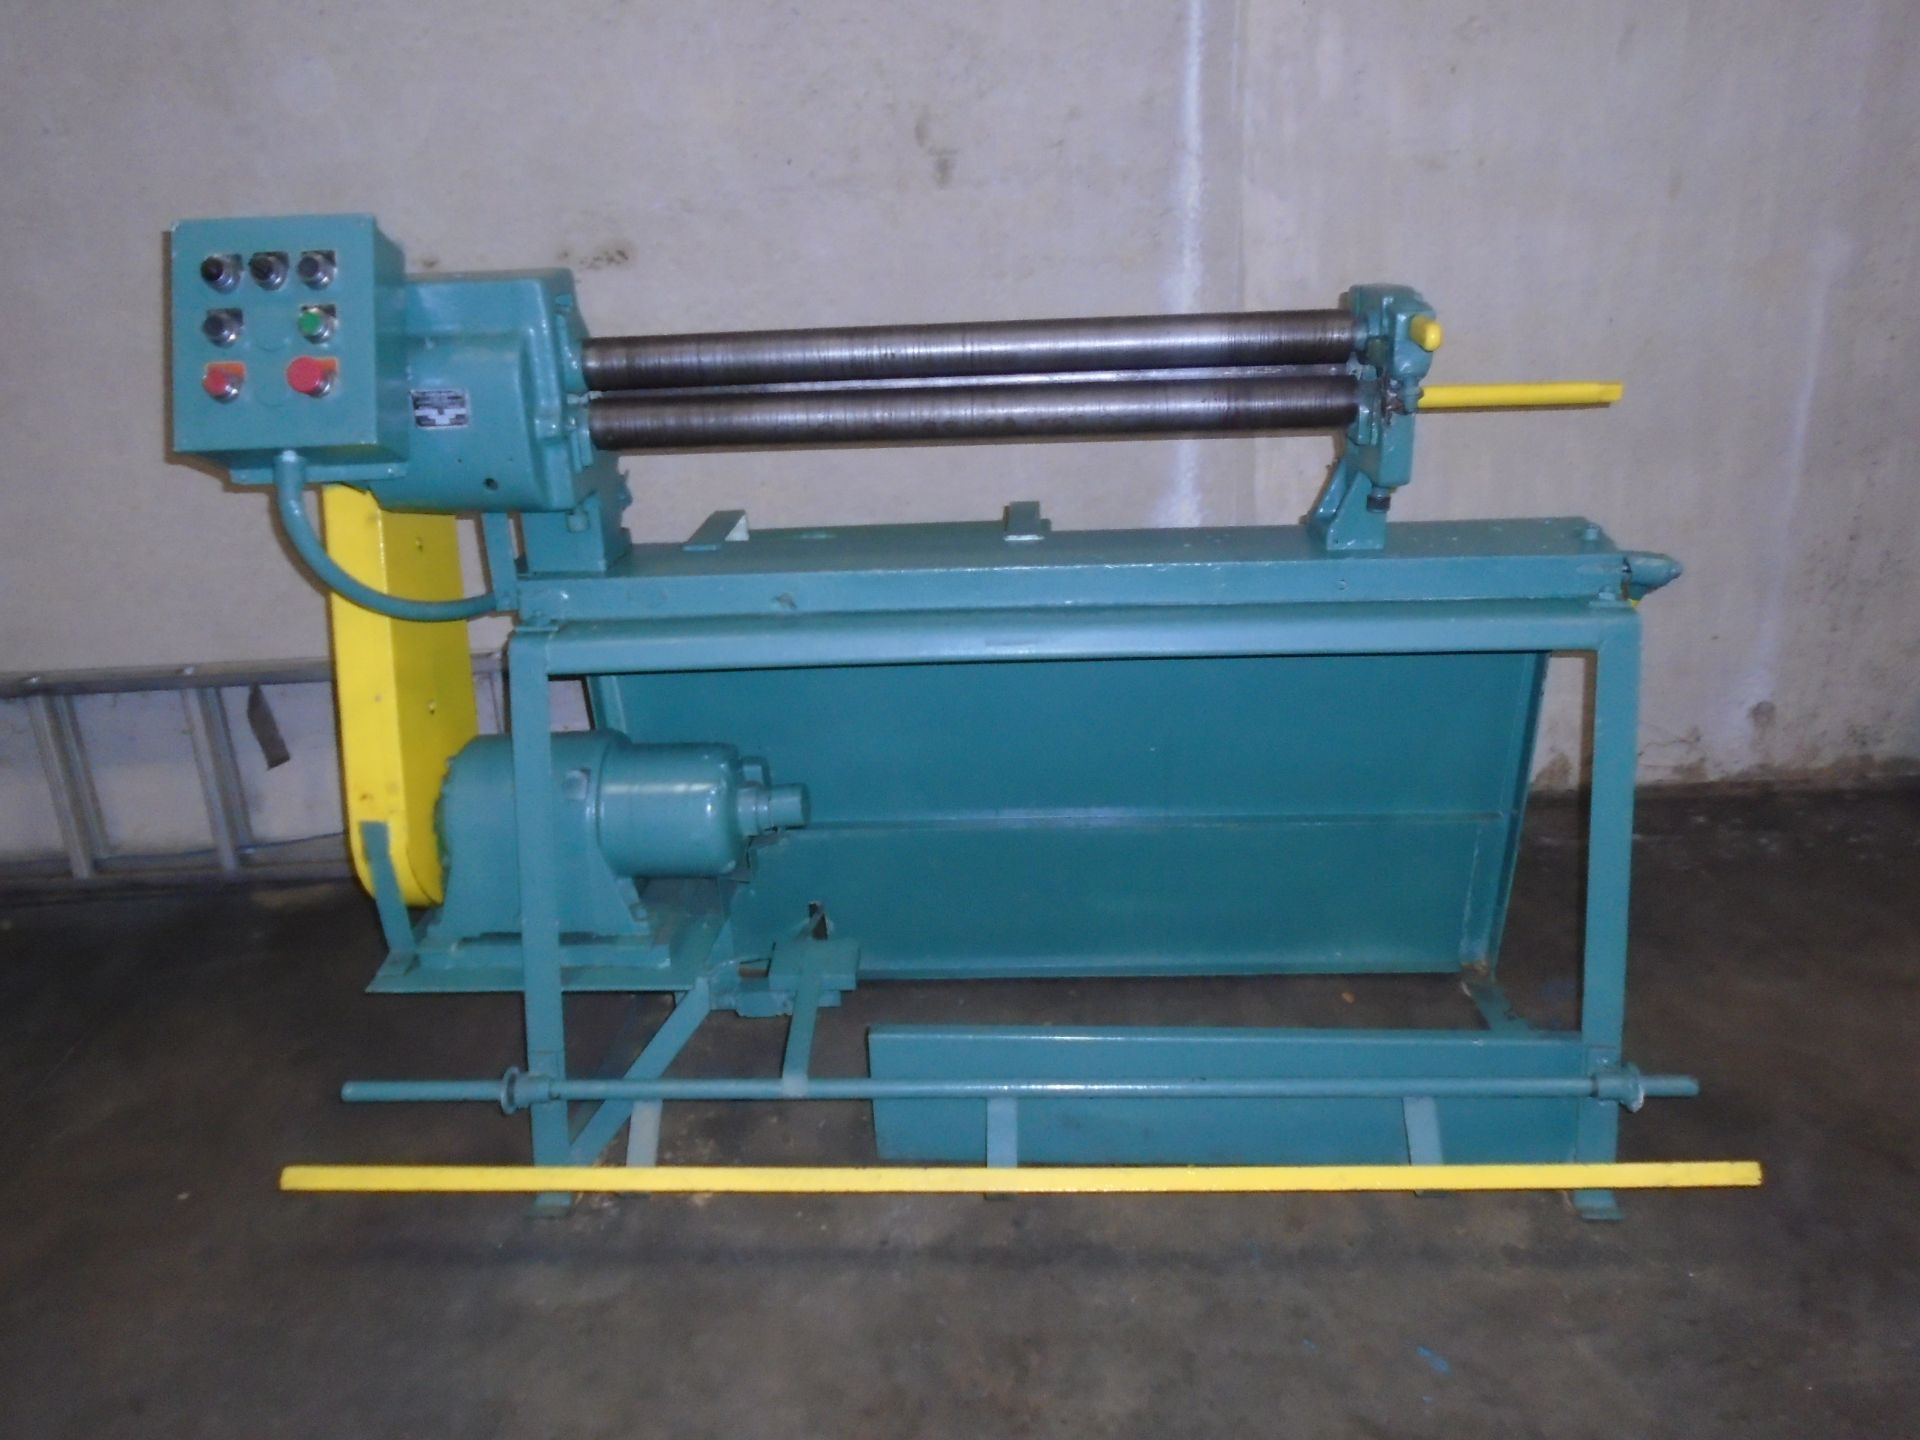 Peck Stow & Wilcox Co Power Roll Forming Machine 20 Gage Capacity 3” x 36” Model 392-E SN: 6/53